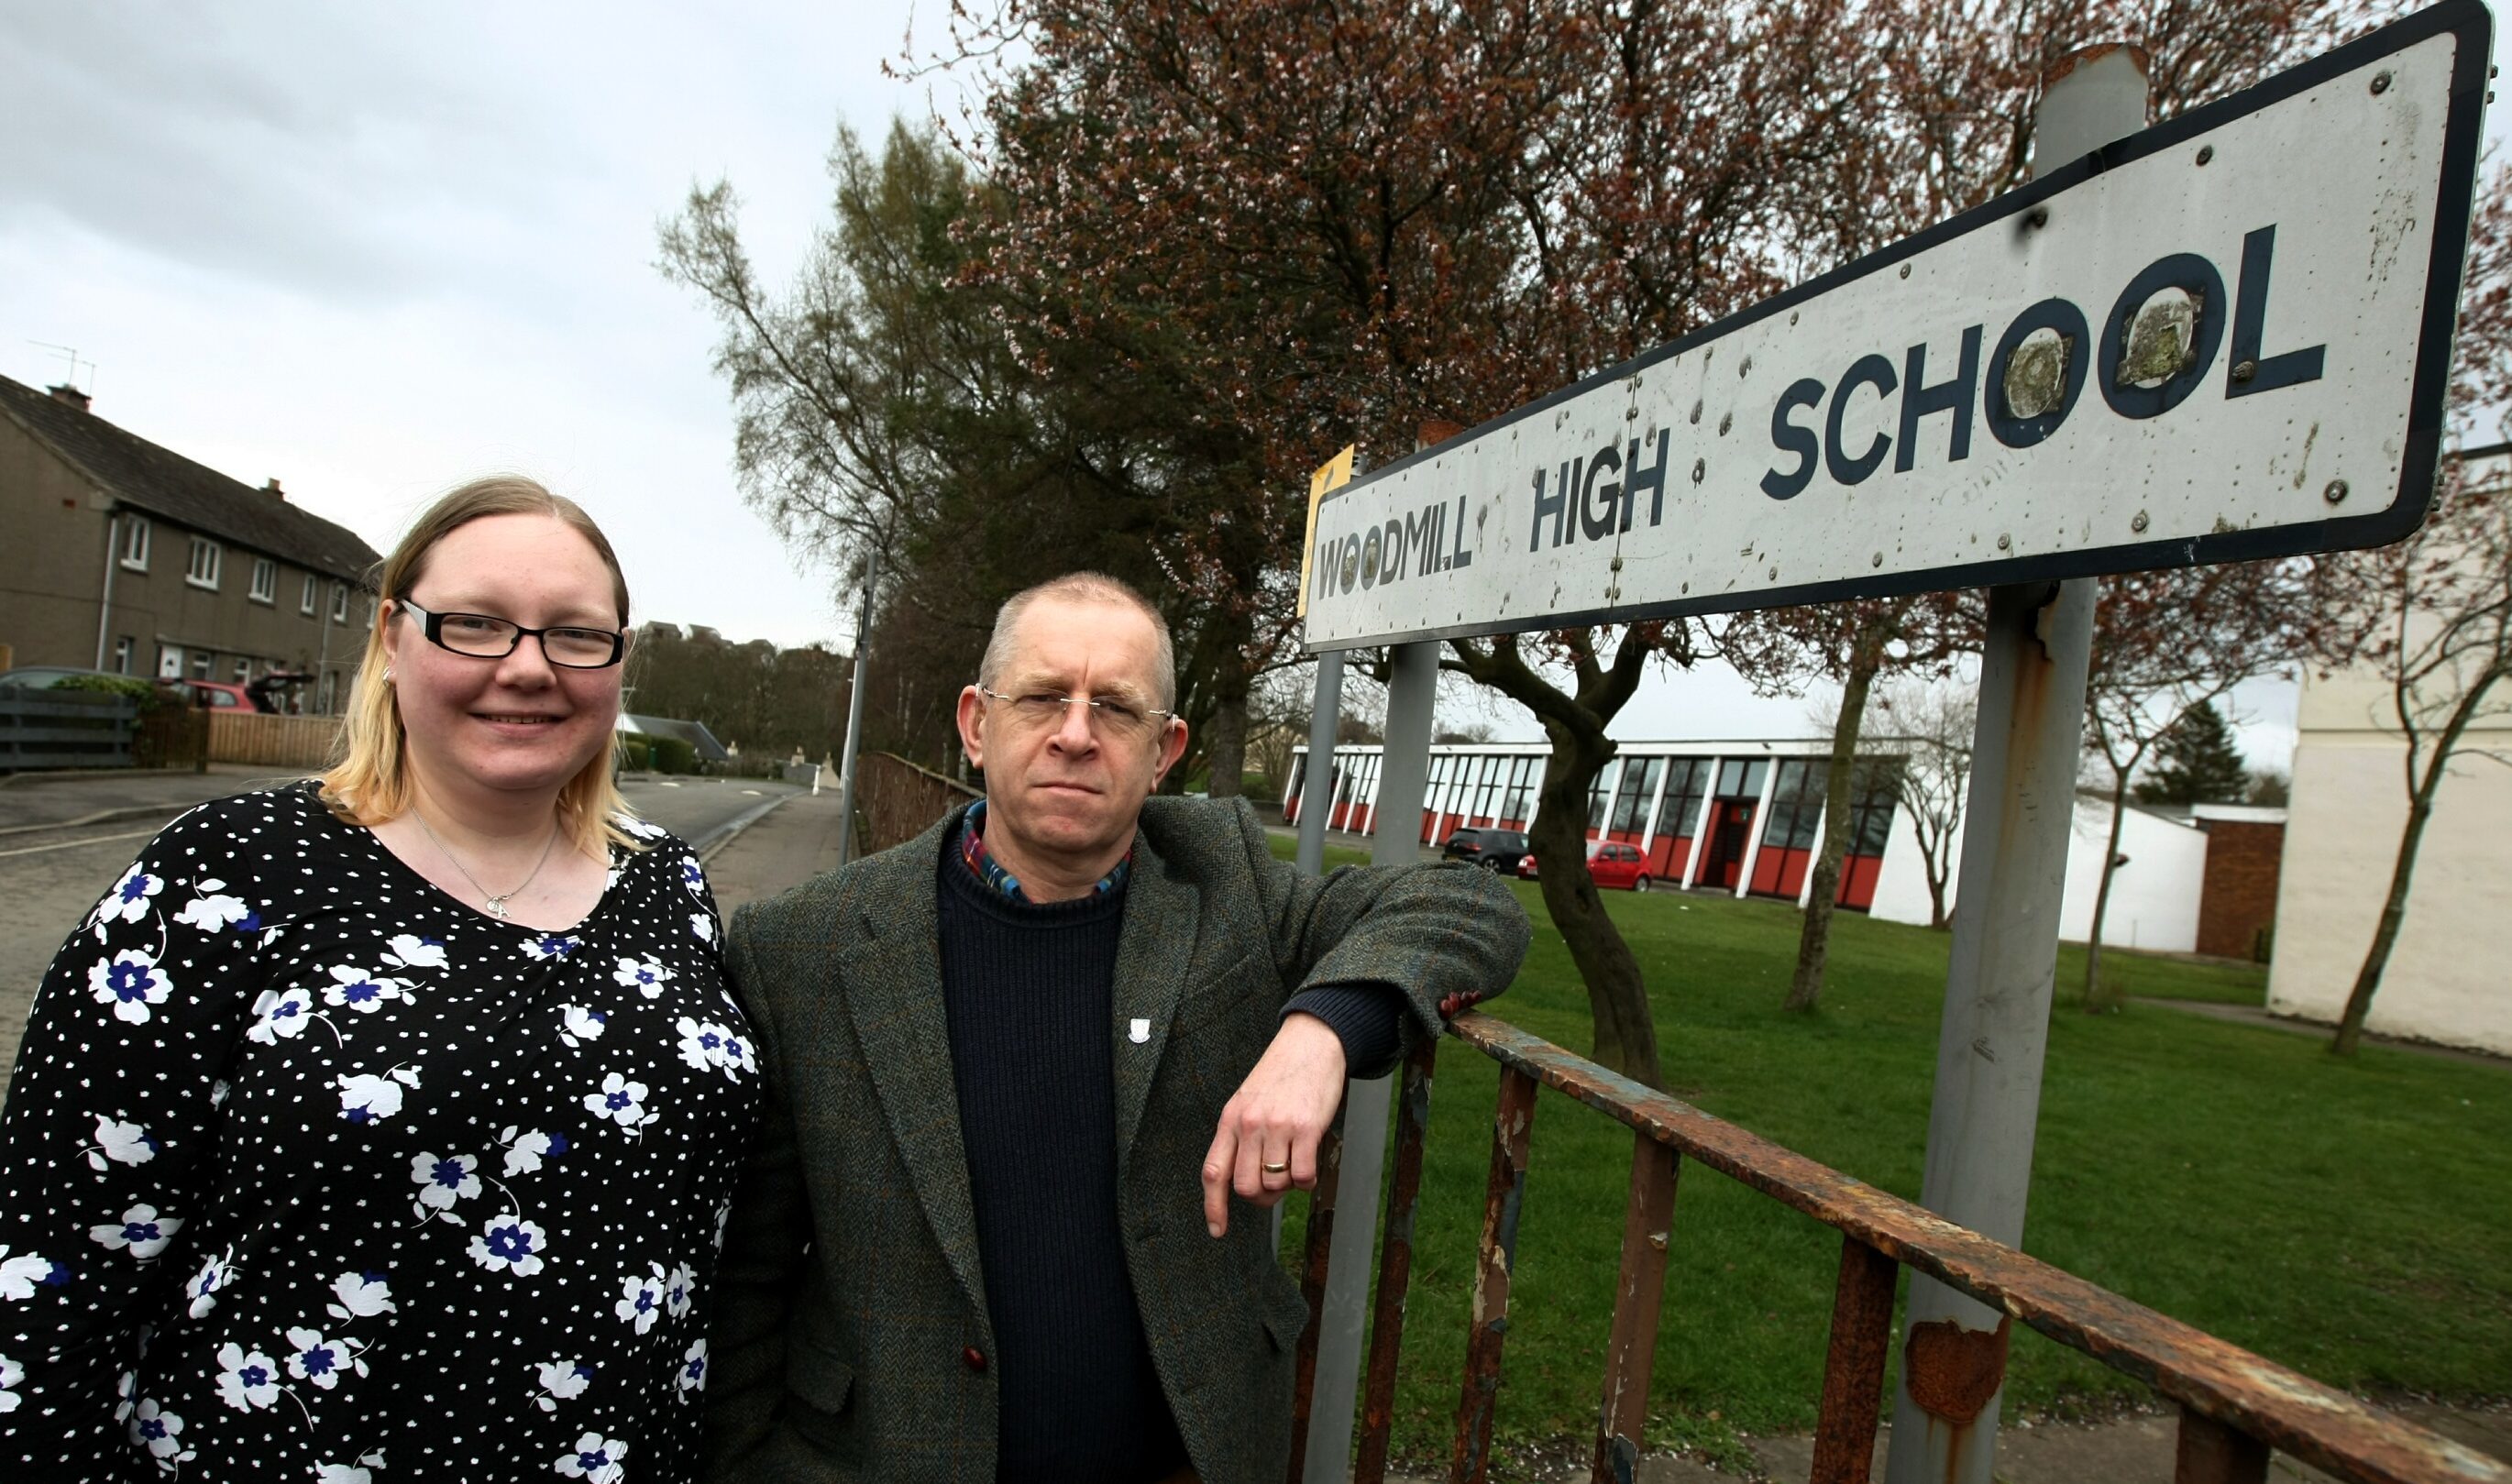 Local councillors Ian Ferguson and Fay Sinclair previously raised issues at Woodmill High School.